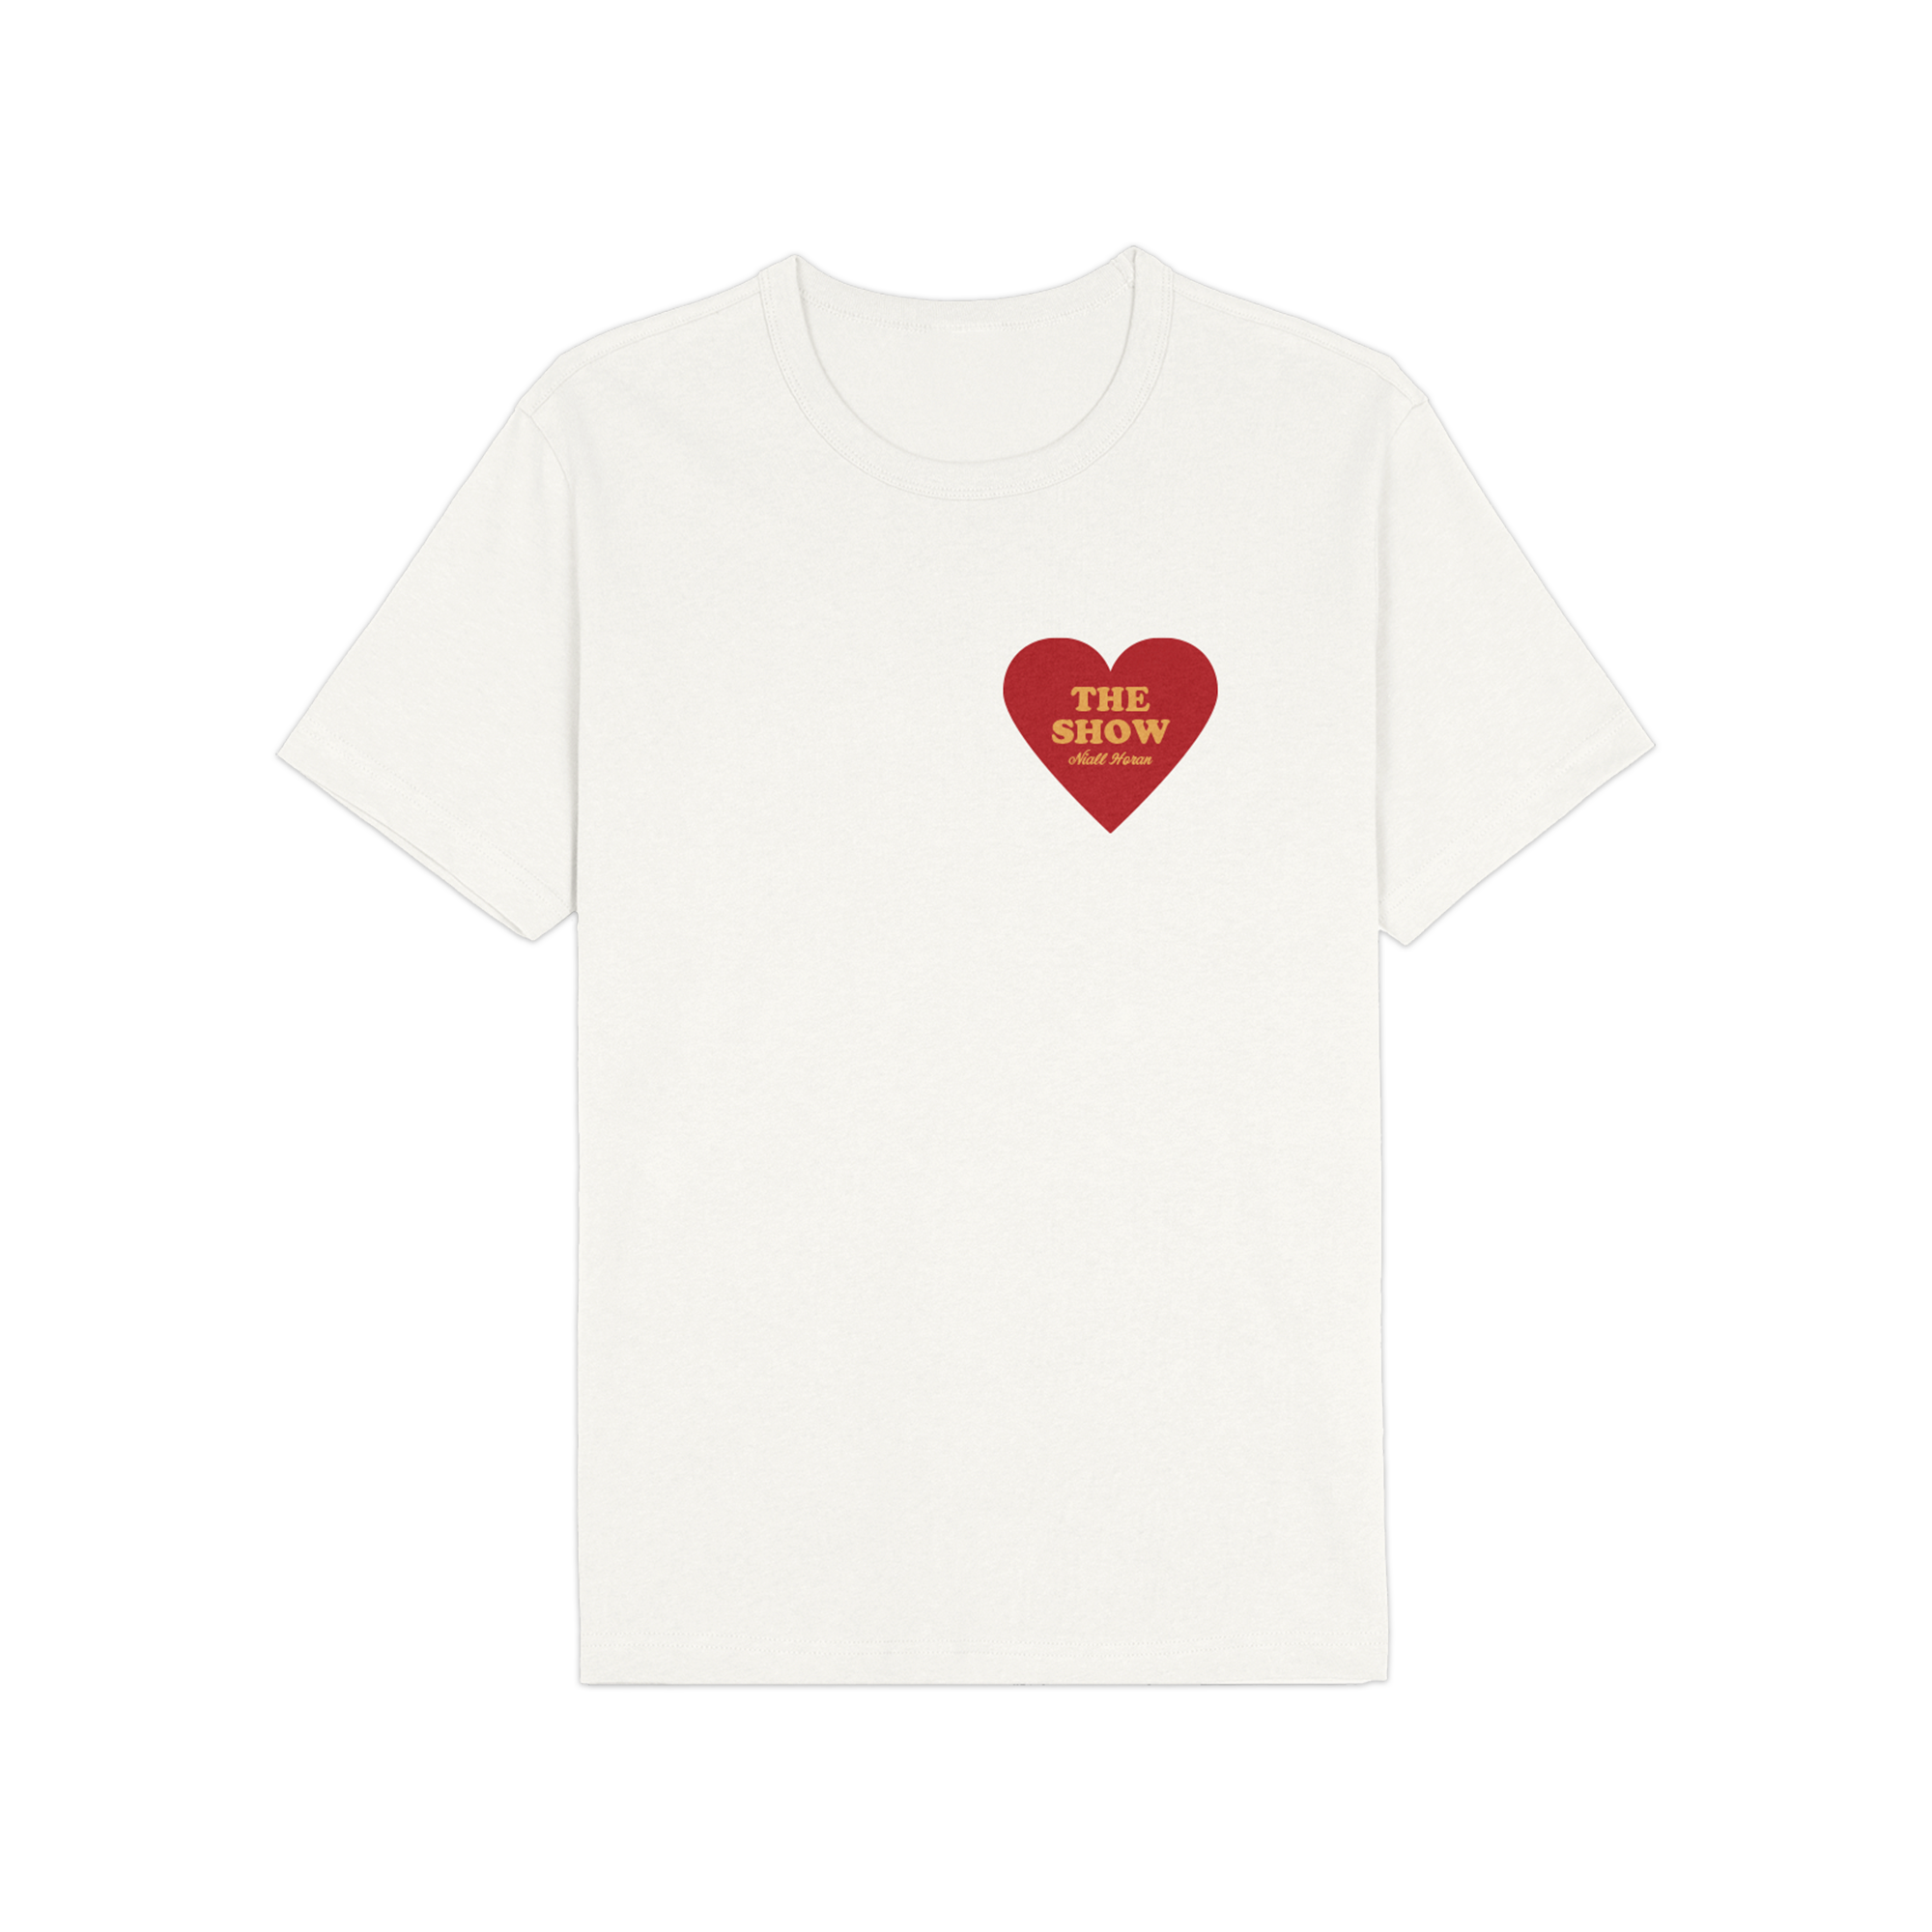 Hello Lovers x The Show - Heart T-Shirt